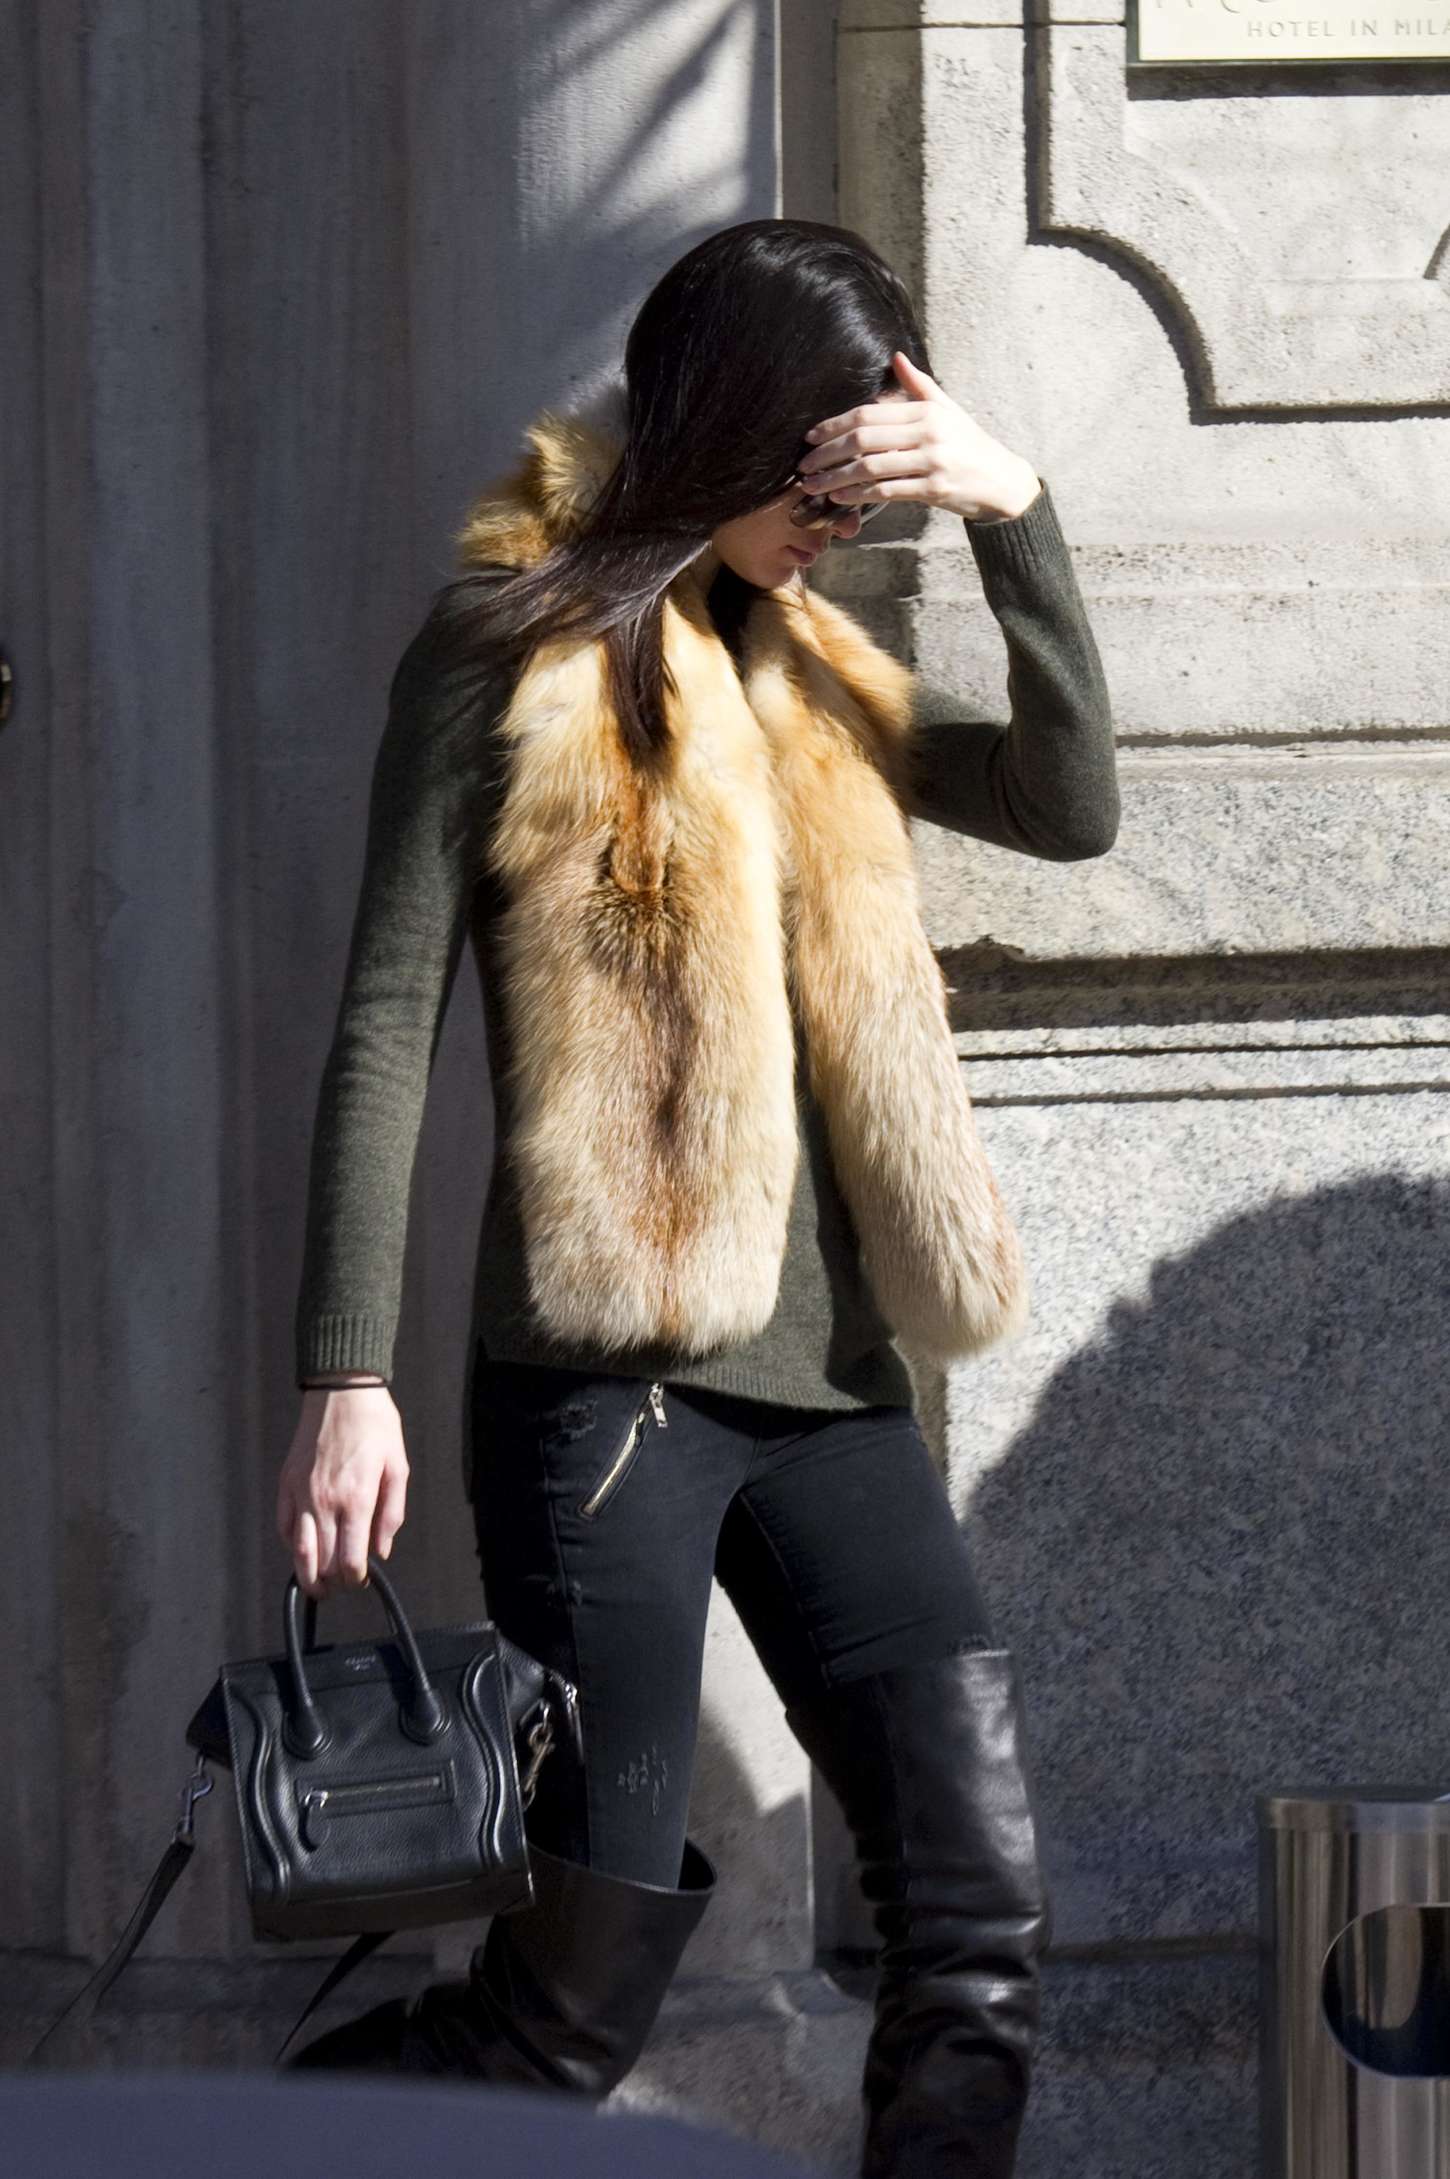 Kendall Jenner is spotted shopping in Milan